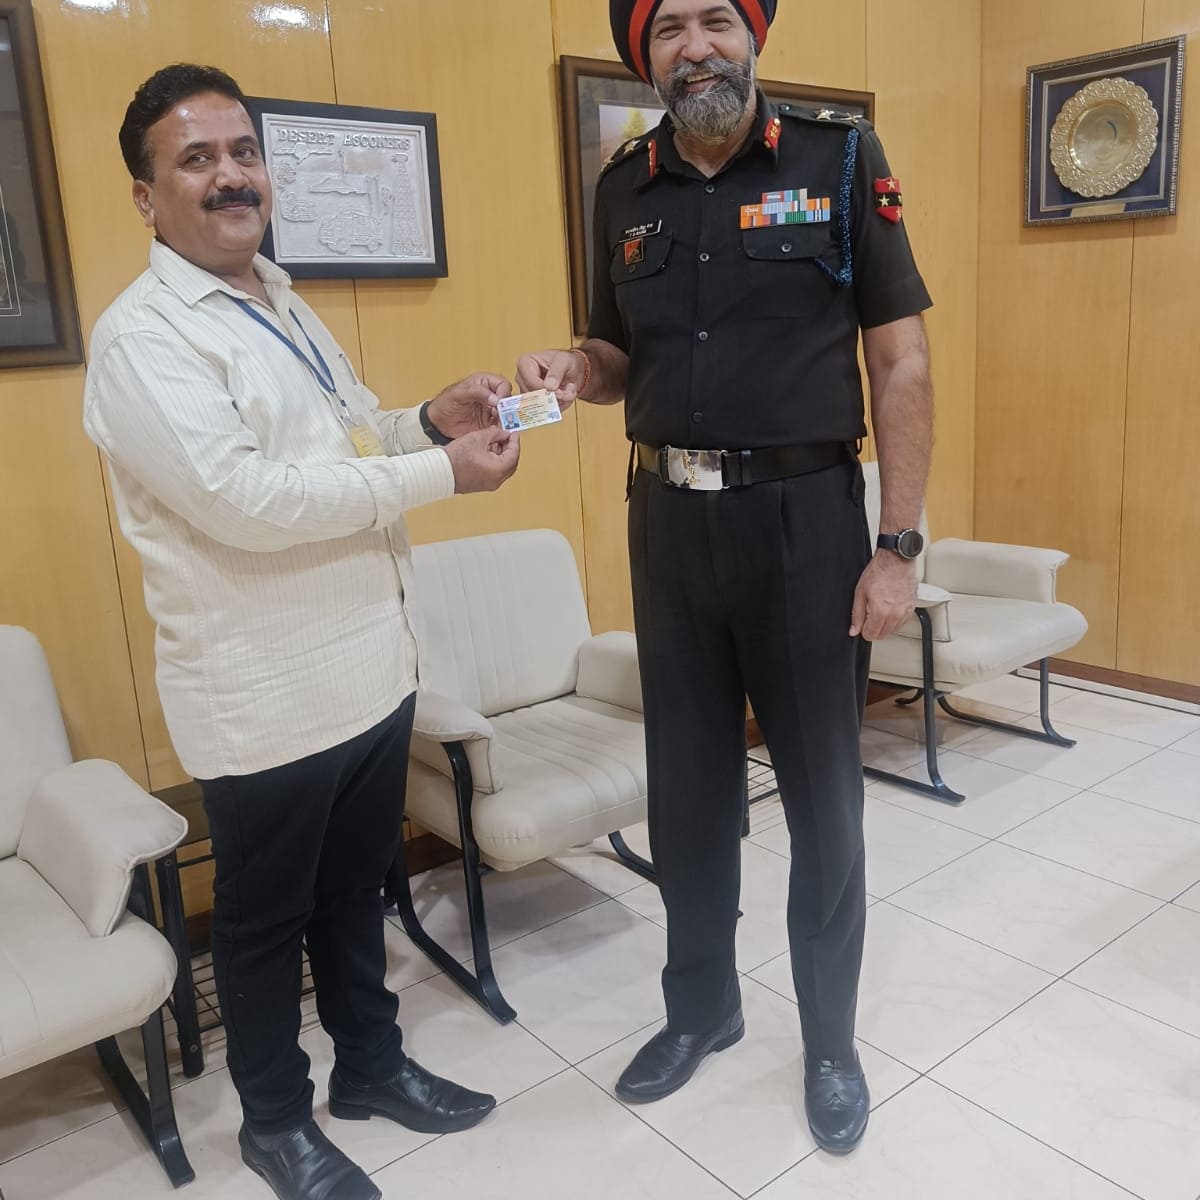 Good evening, the New voter card of Army officers have been handed over to Hon'ble Major General Bains,  Brigadier Kutti , Brigadier Phadtare, Brigadier Salil Seth, Lt Colonel Pattar. 
#deopune#ceomaharashtra